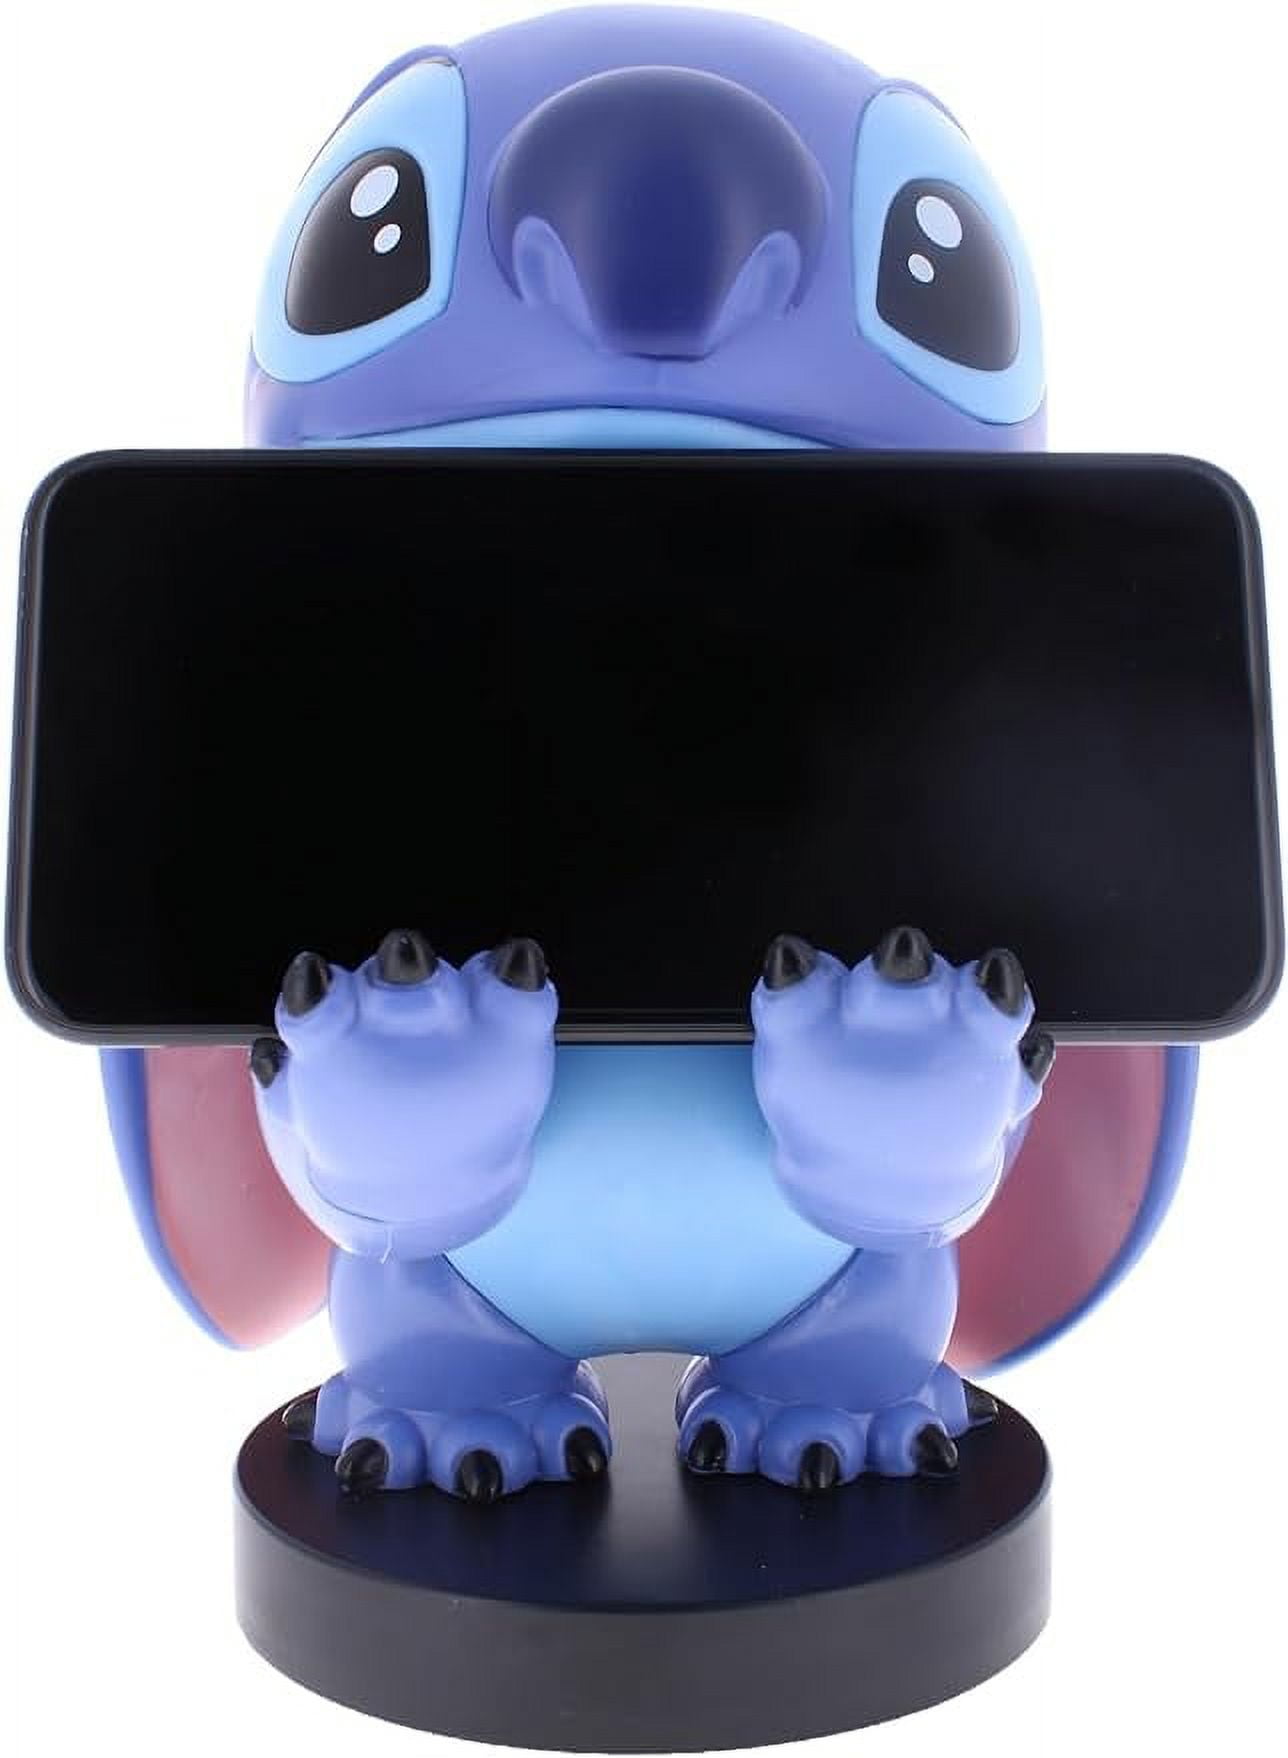 Geek Nation - جيك نيشن‎ on Instagram: Stitch controller & phone holder ❤️  Everyone's favourite aline is here to hold your phone, remote or gaming  controller. Now available at Geek Nation 🇰🇼 #phoneholder #stitch